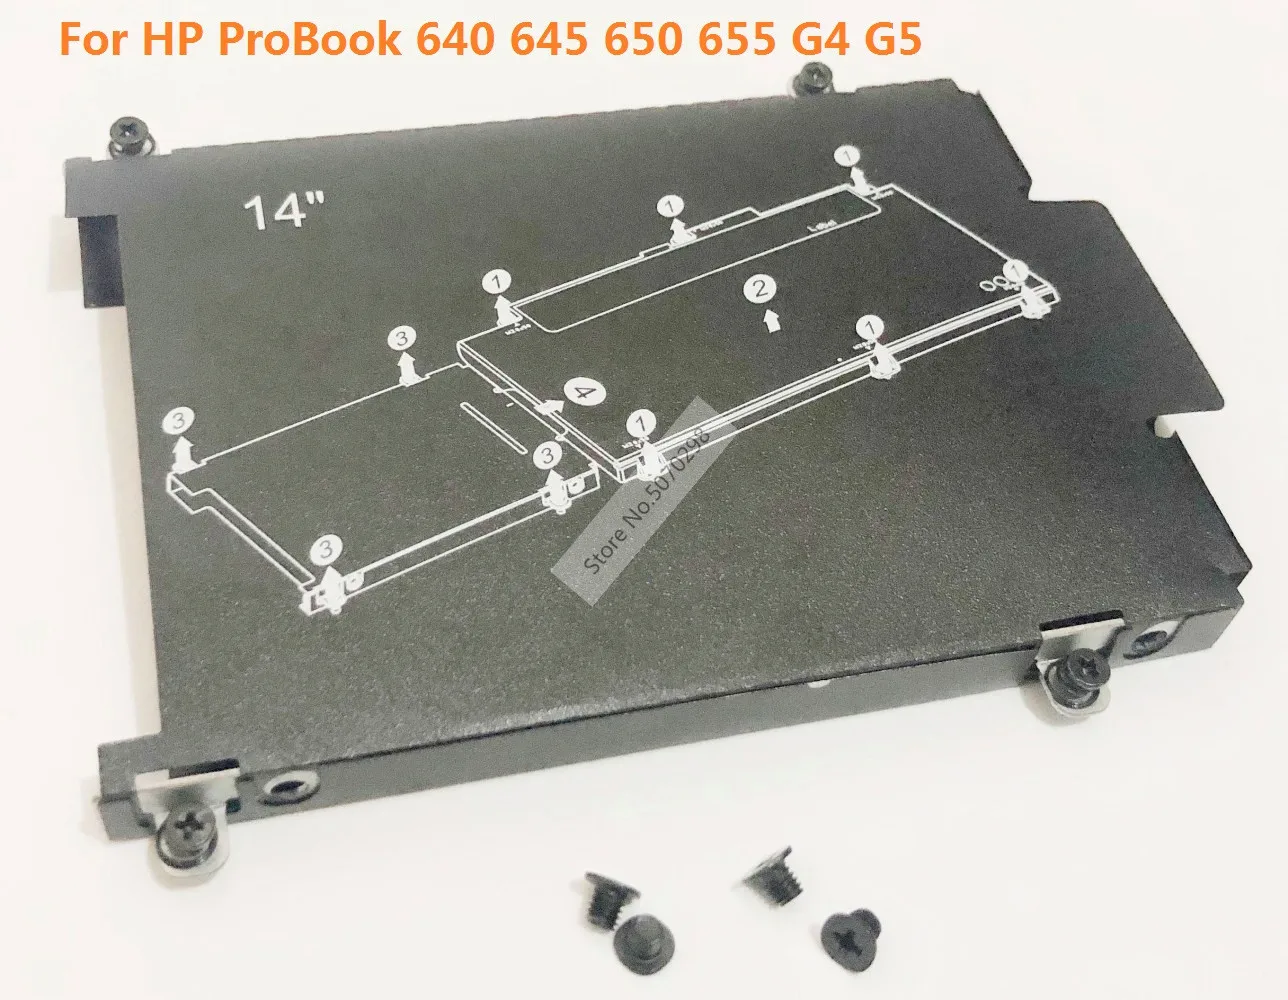 2.5 SATA Hard Disk Drive HDD SSD Caddy Frame Tray Adapter Bracket with Screws for HP ProBook 640 645 650 655 G4 G5